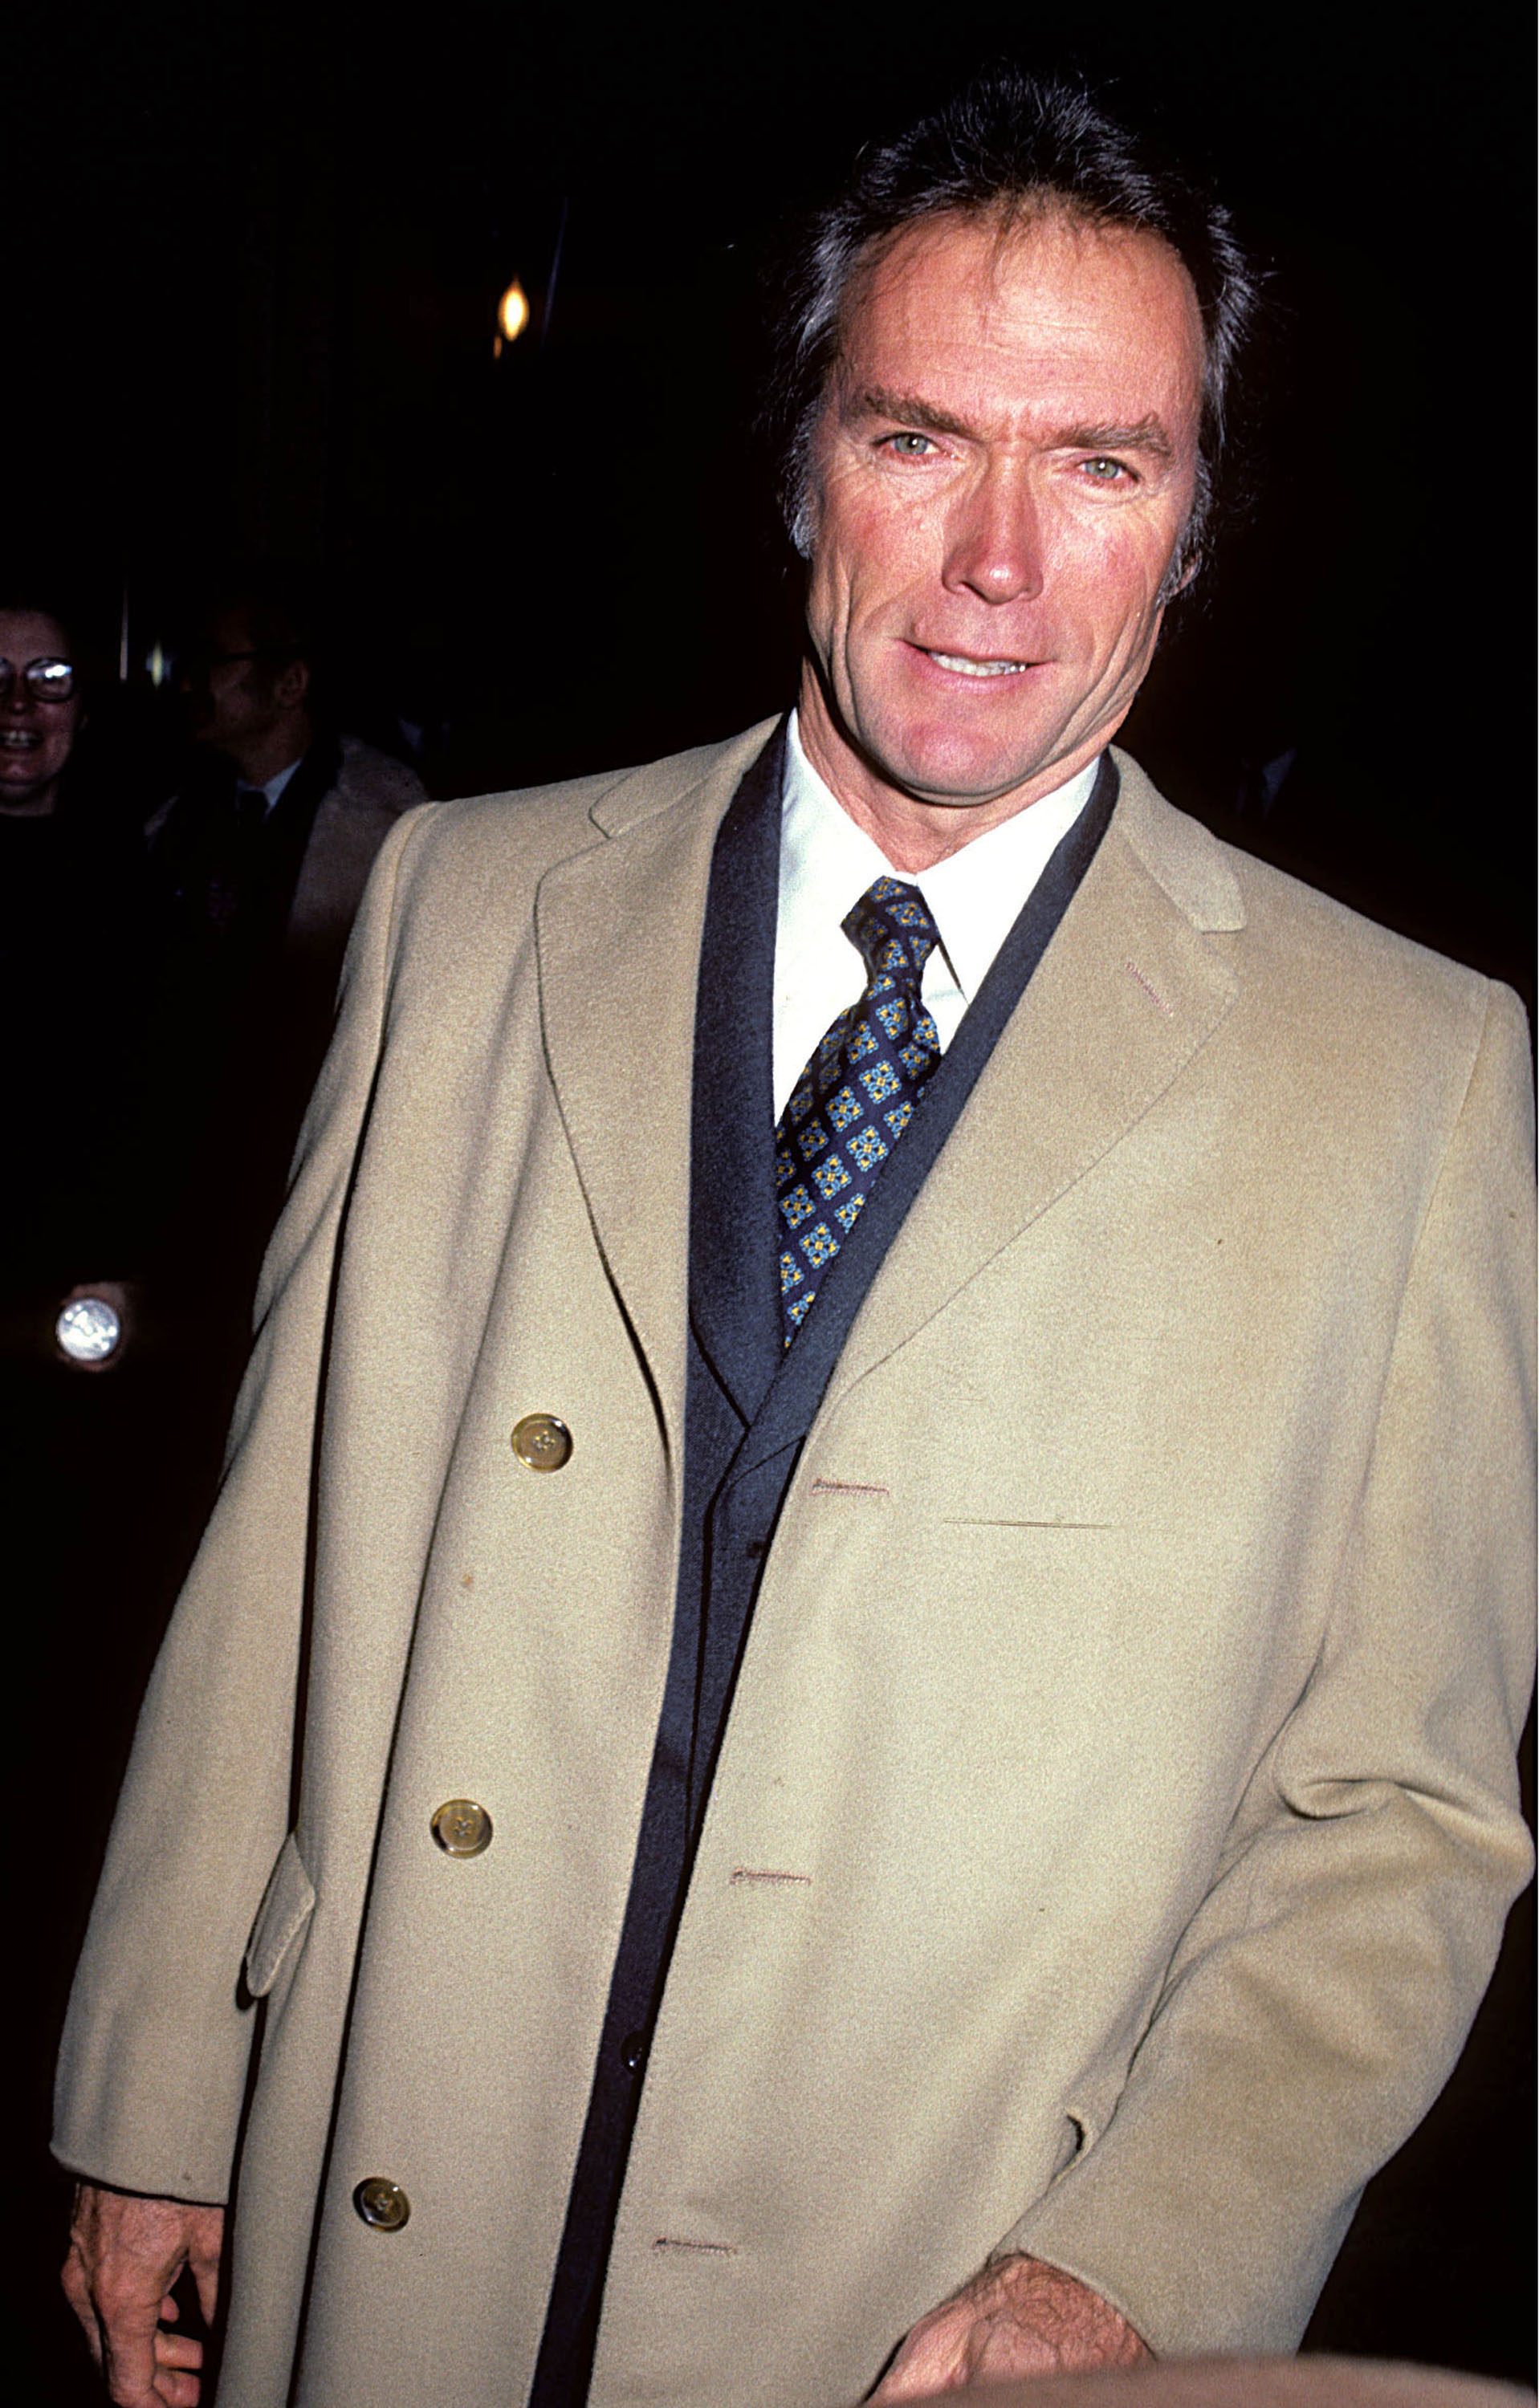 A person in a beige overcoat and patterned tie smiles at a camera